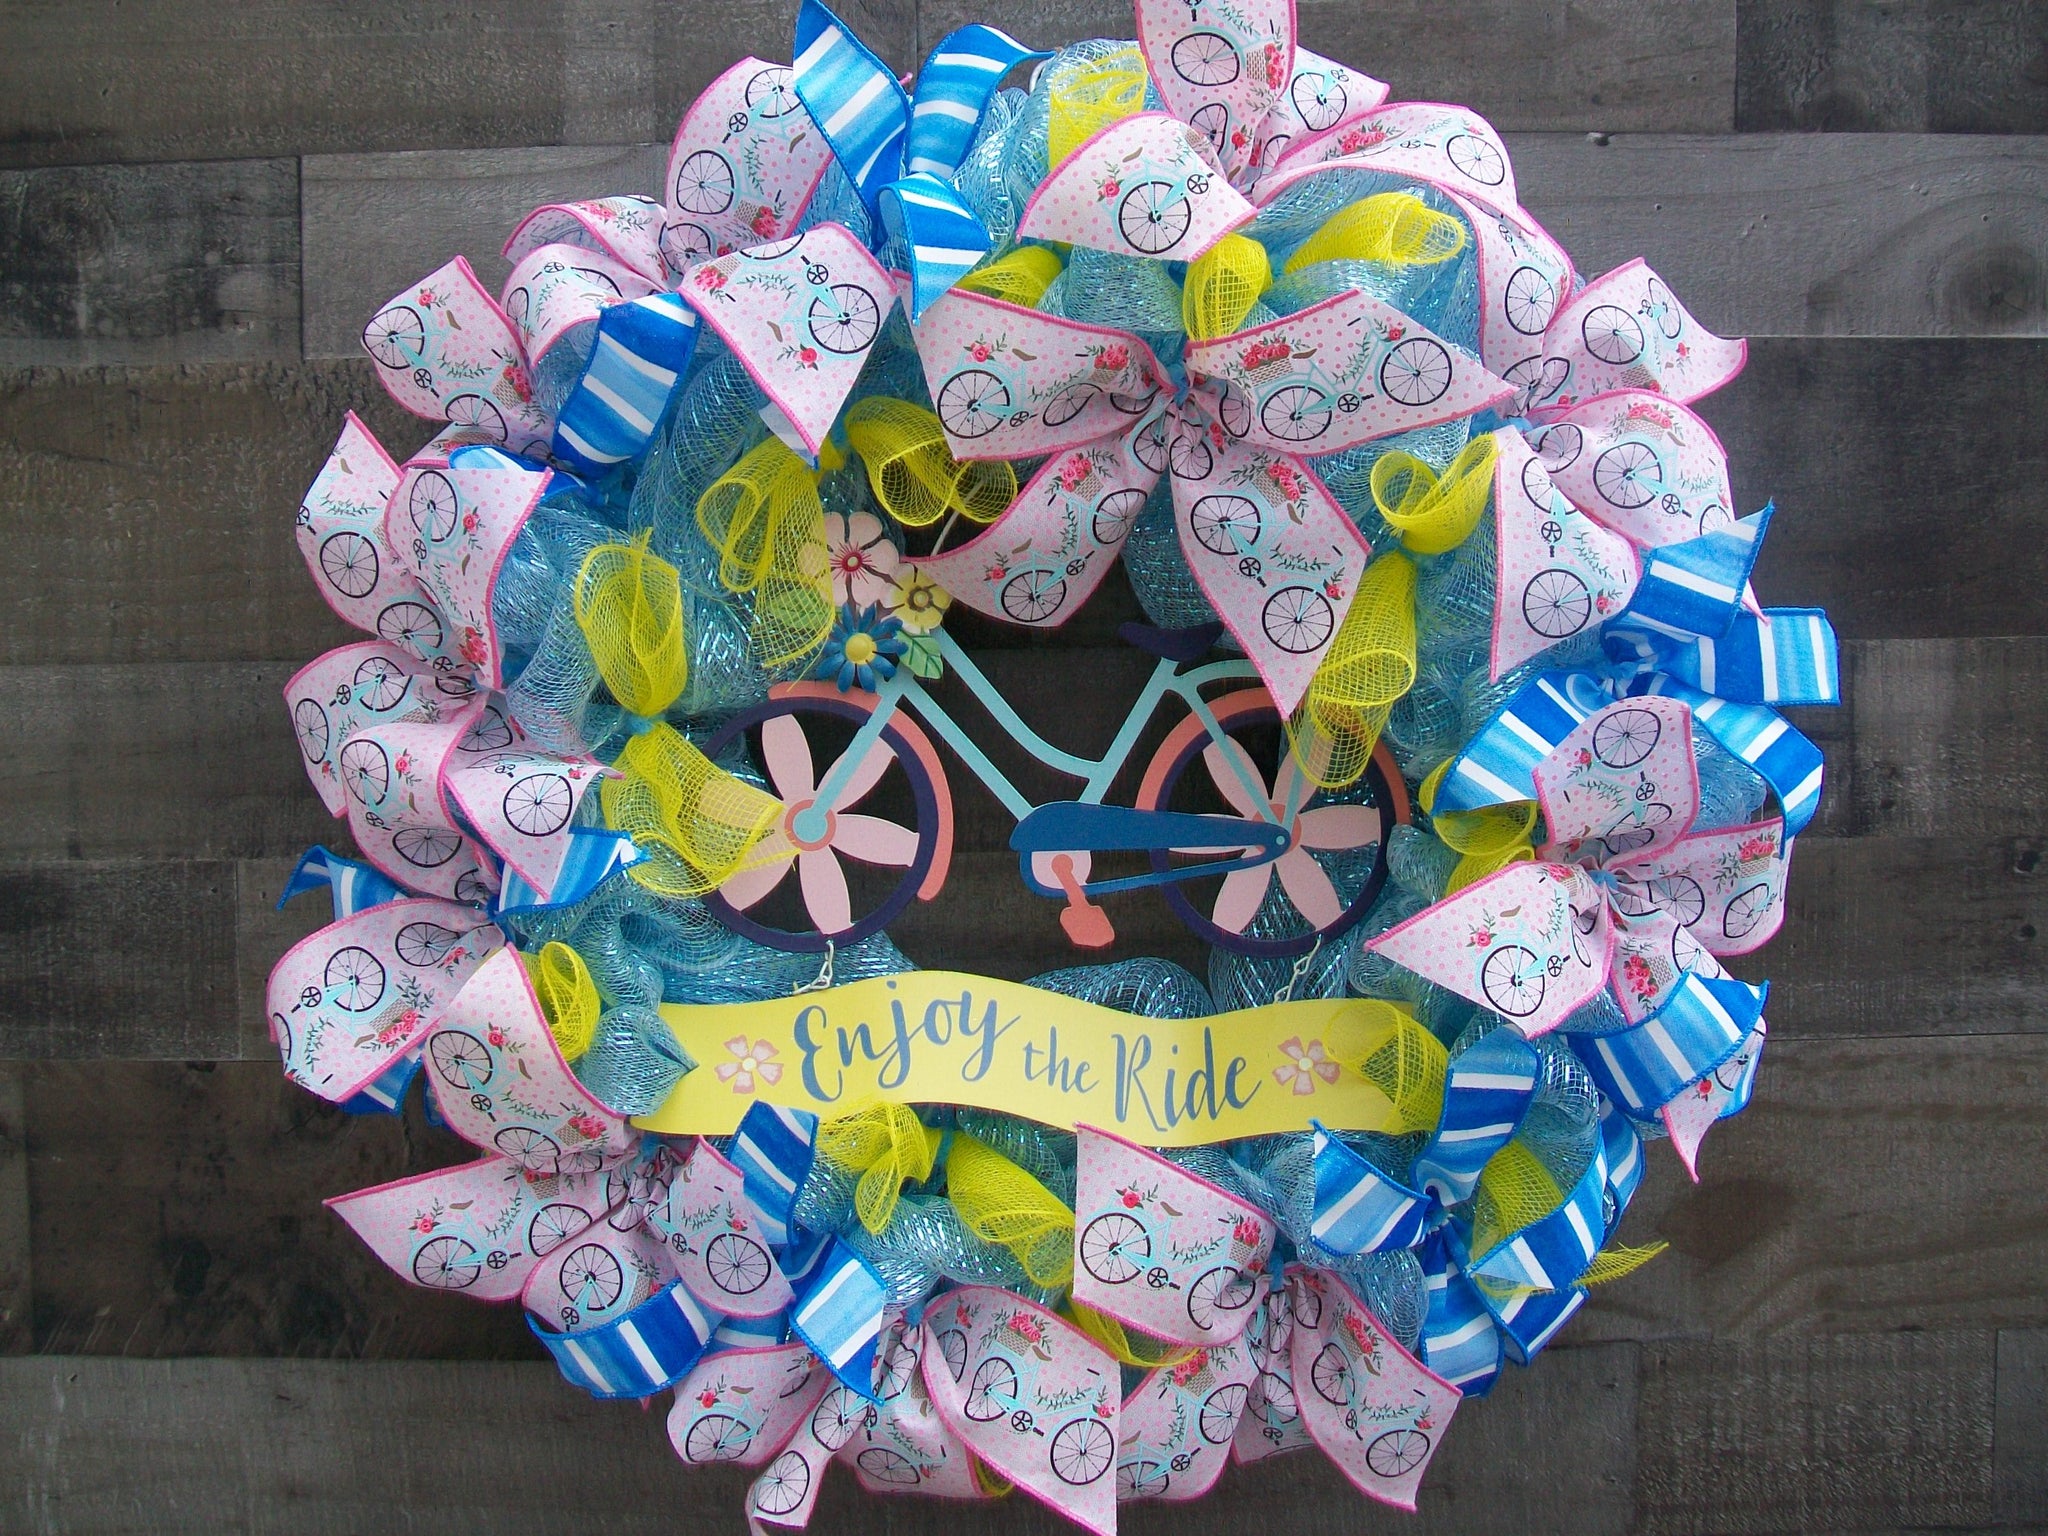 Enjoy the Ride Bicycle Ribbon Mesh Spring Summer Whimsical Multicolor Front Door Wreath